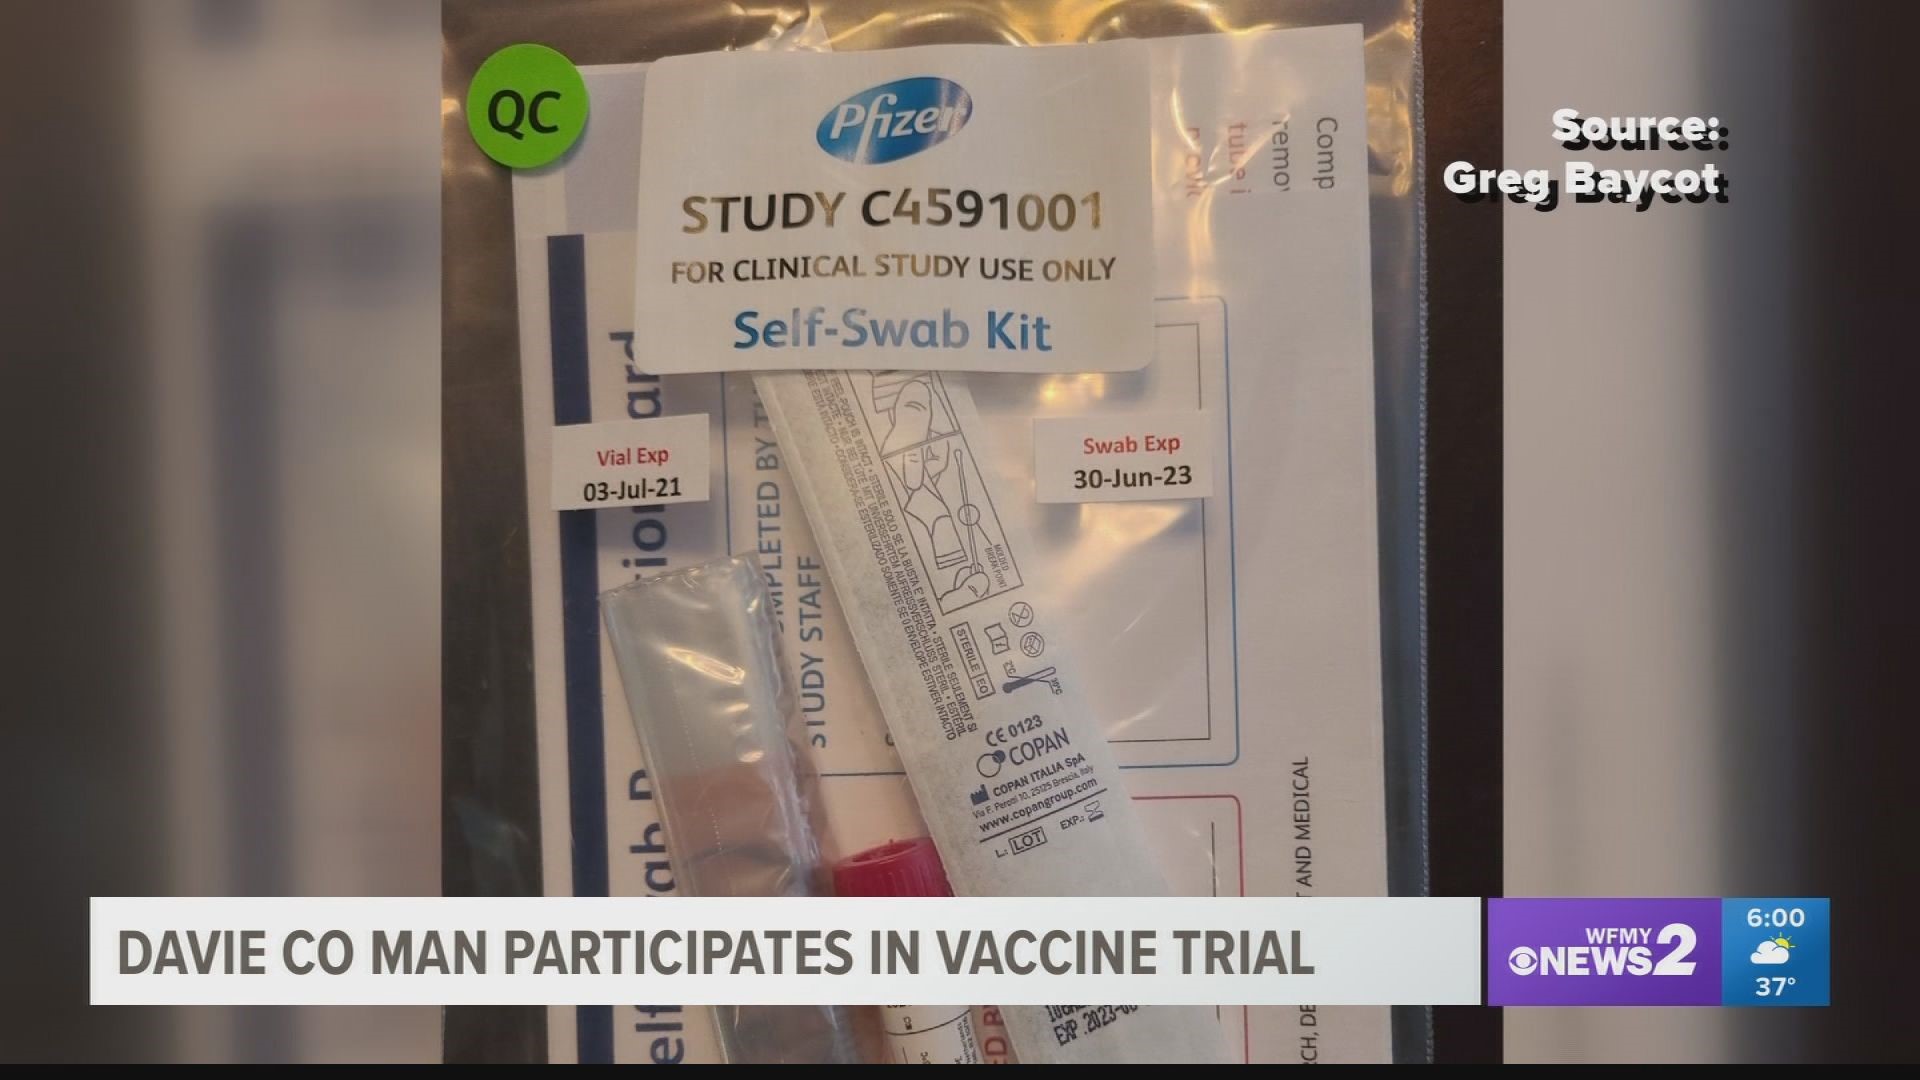 A Davie County man participated in Pfizer’s COVID-19 vaccine trial in Winston-Salem. He said he tested twice for antibodies and showed immunity from the virus.